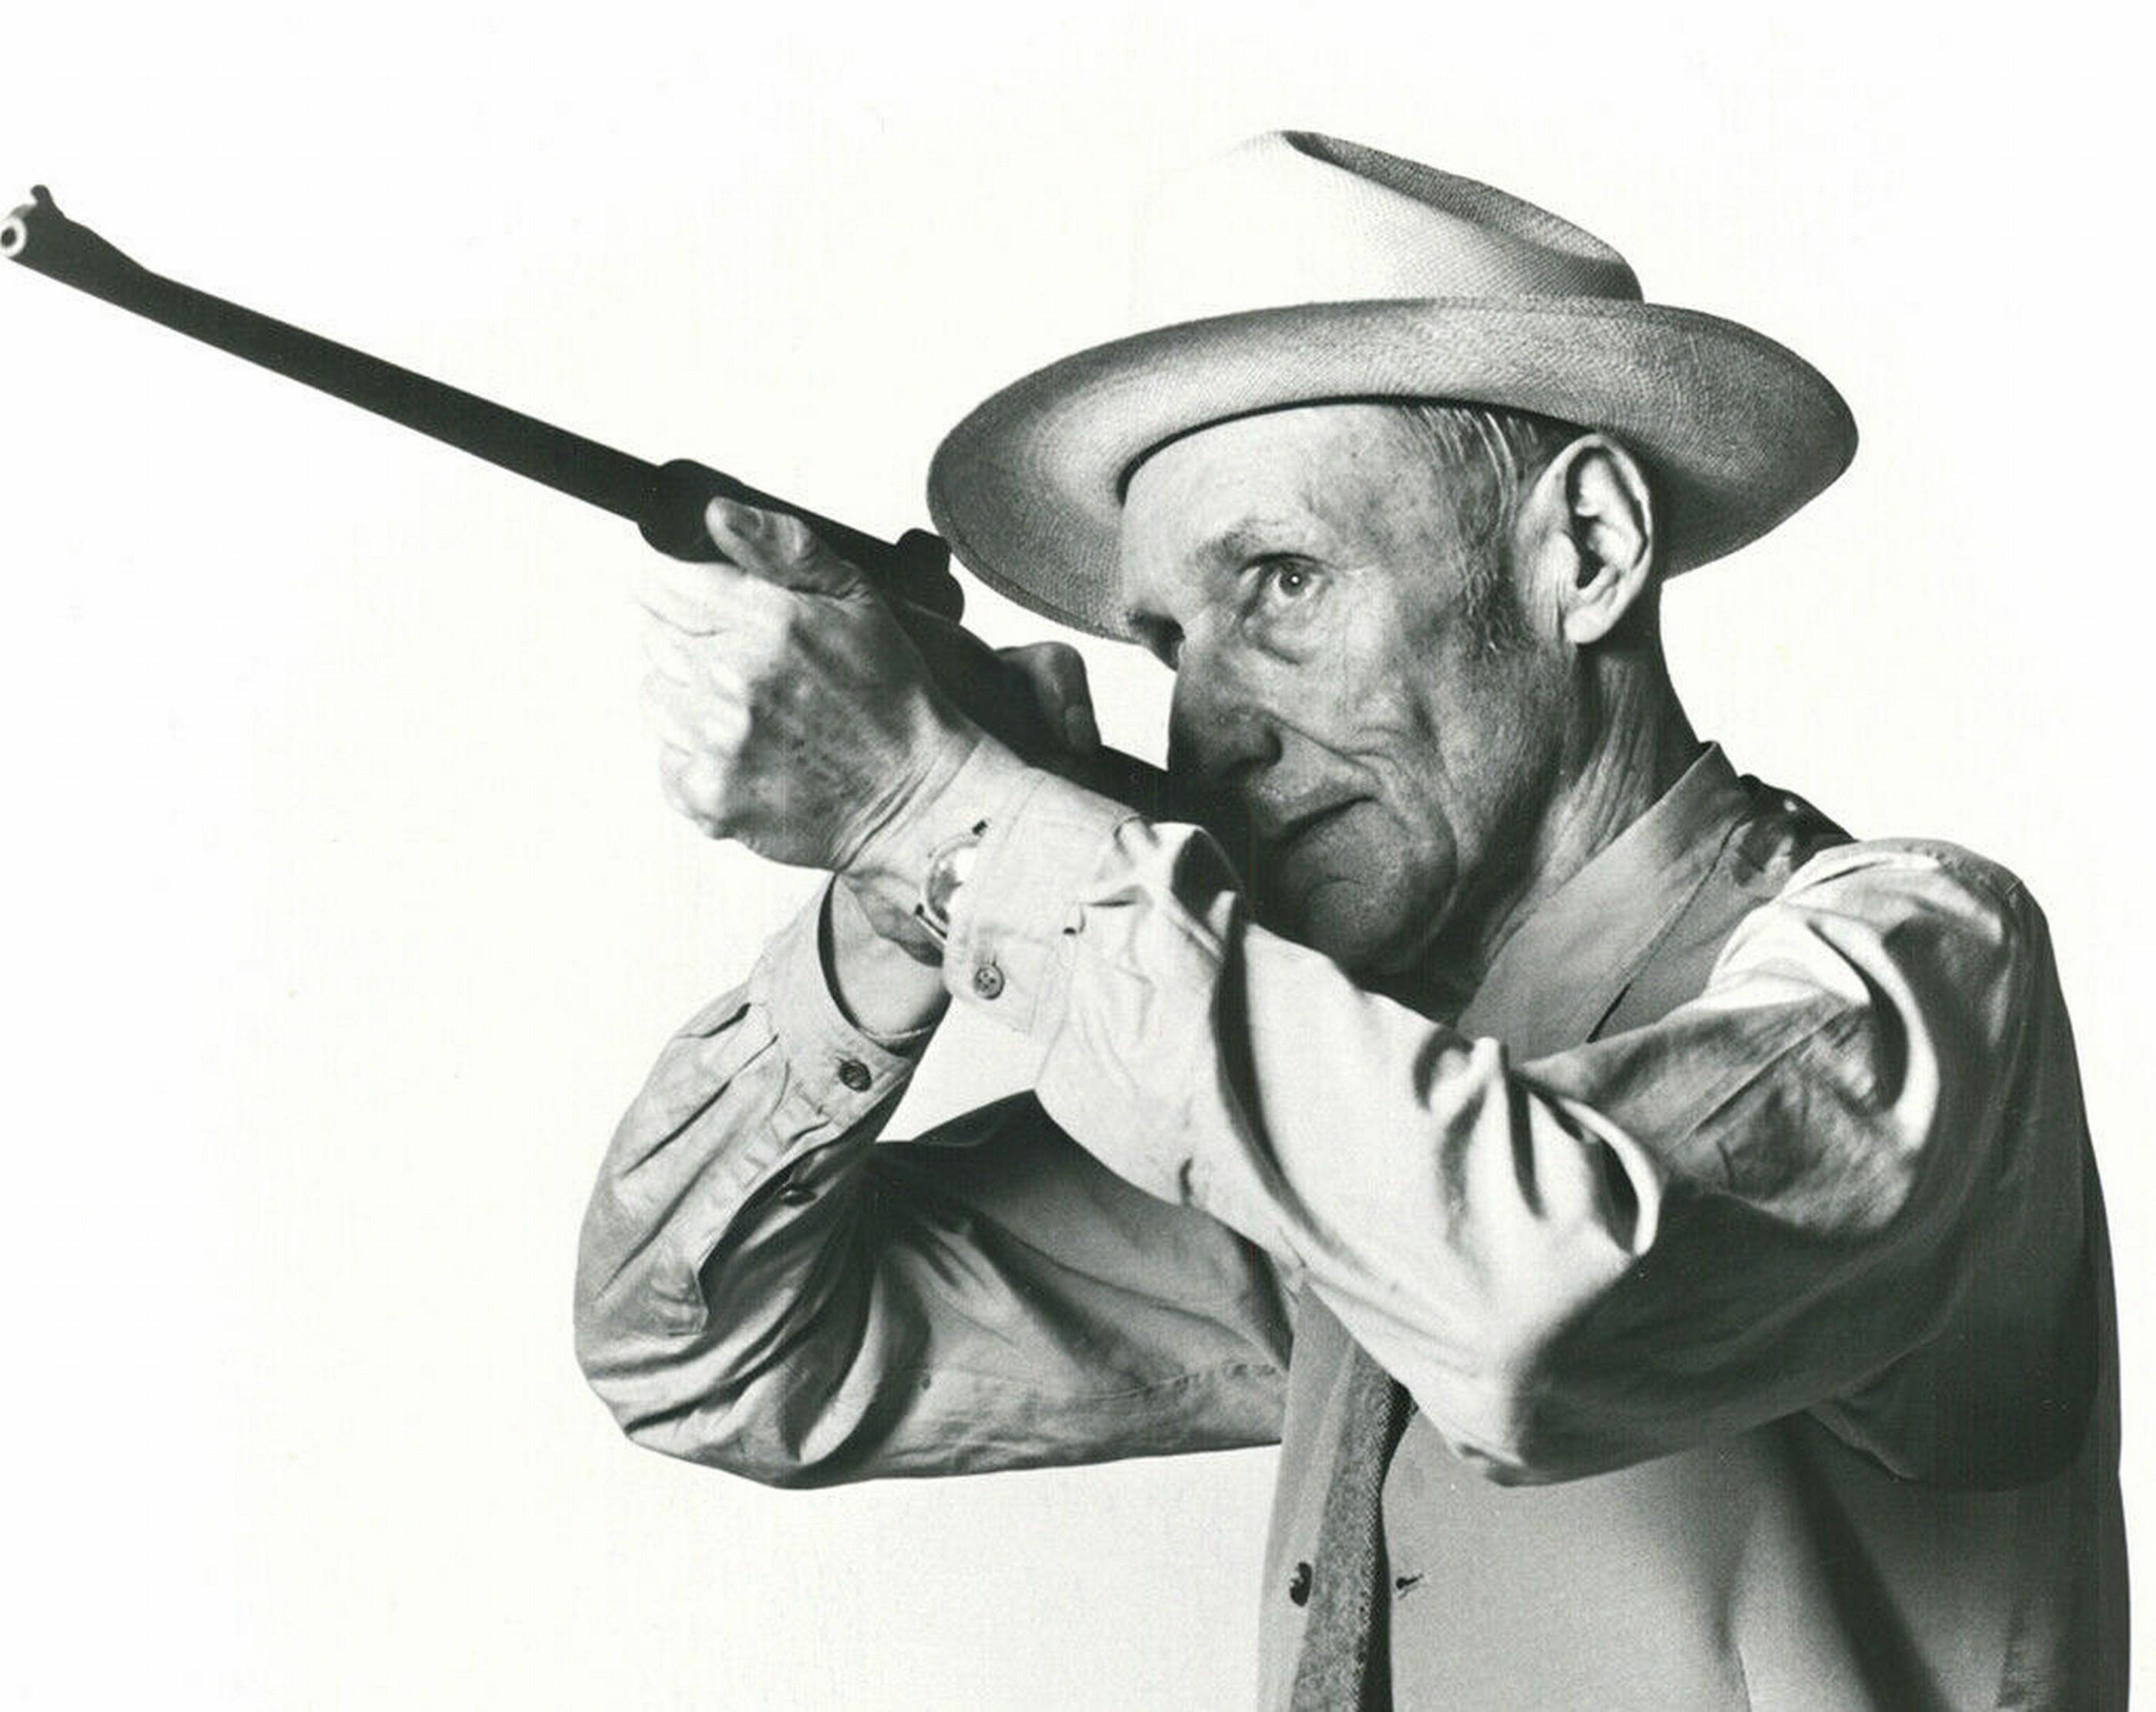 William S. Burroughs (~38% OFF LIST PRICE, LIMITED TIME) - Photograph by Robert Mapplethorpe